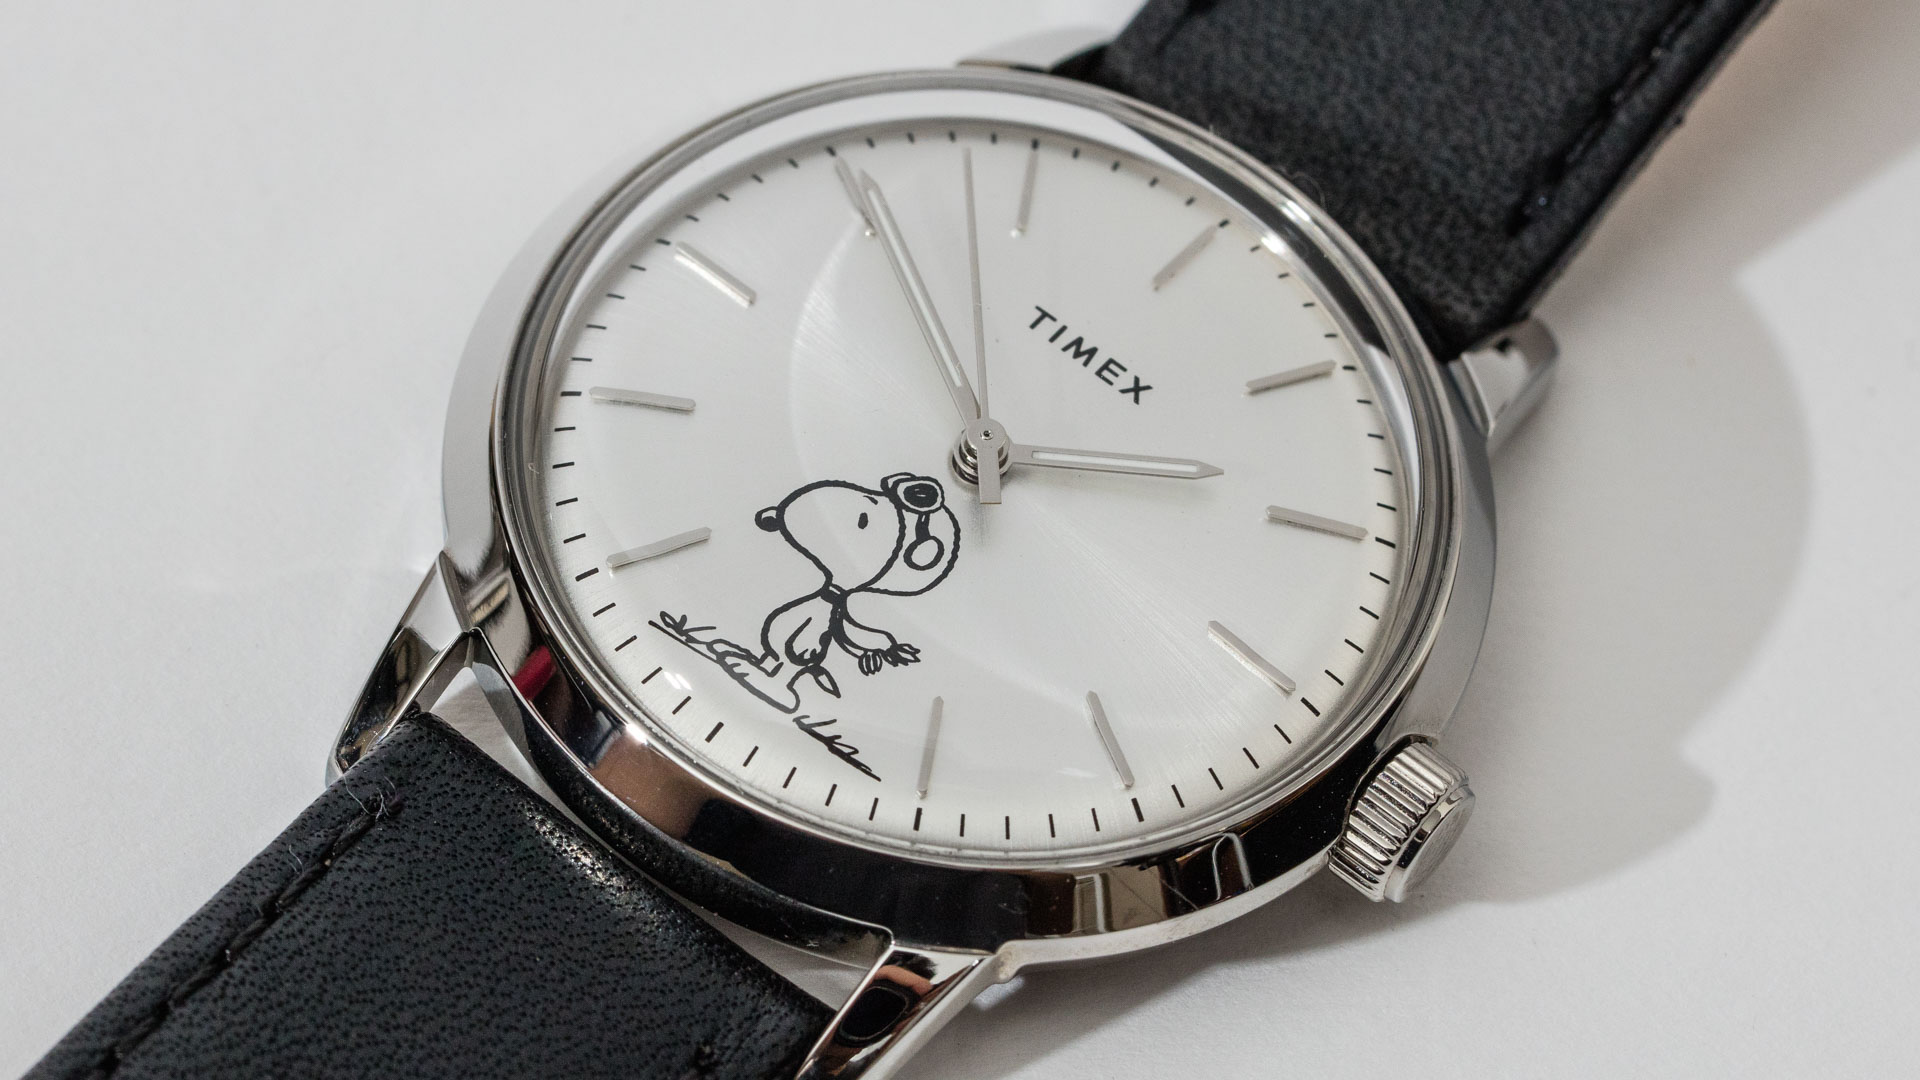 Timex Marlin Automatic Snoopy Edition Watch Hands-On | aBlogtoWatch